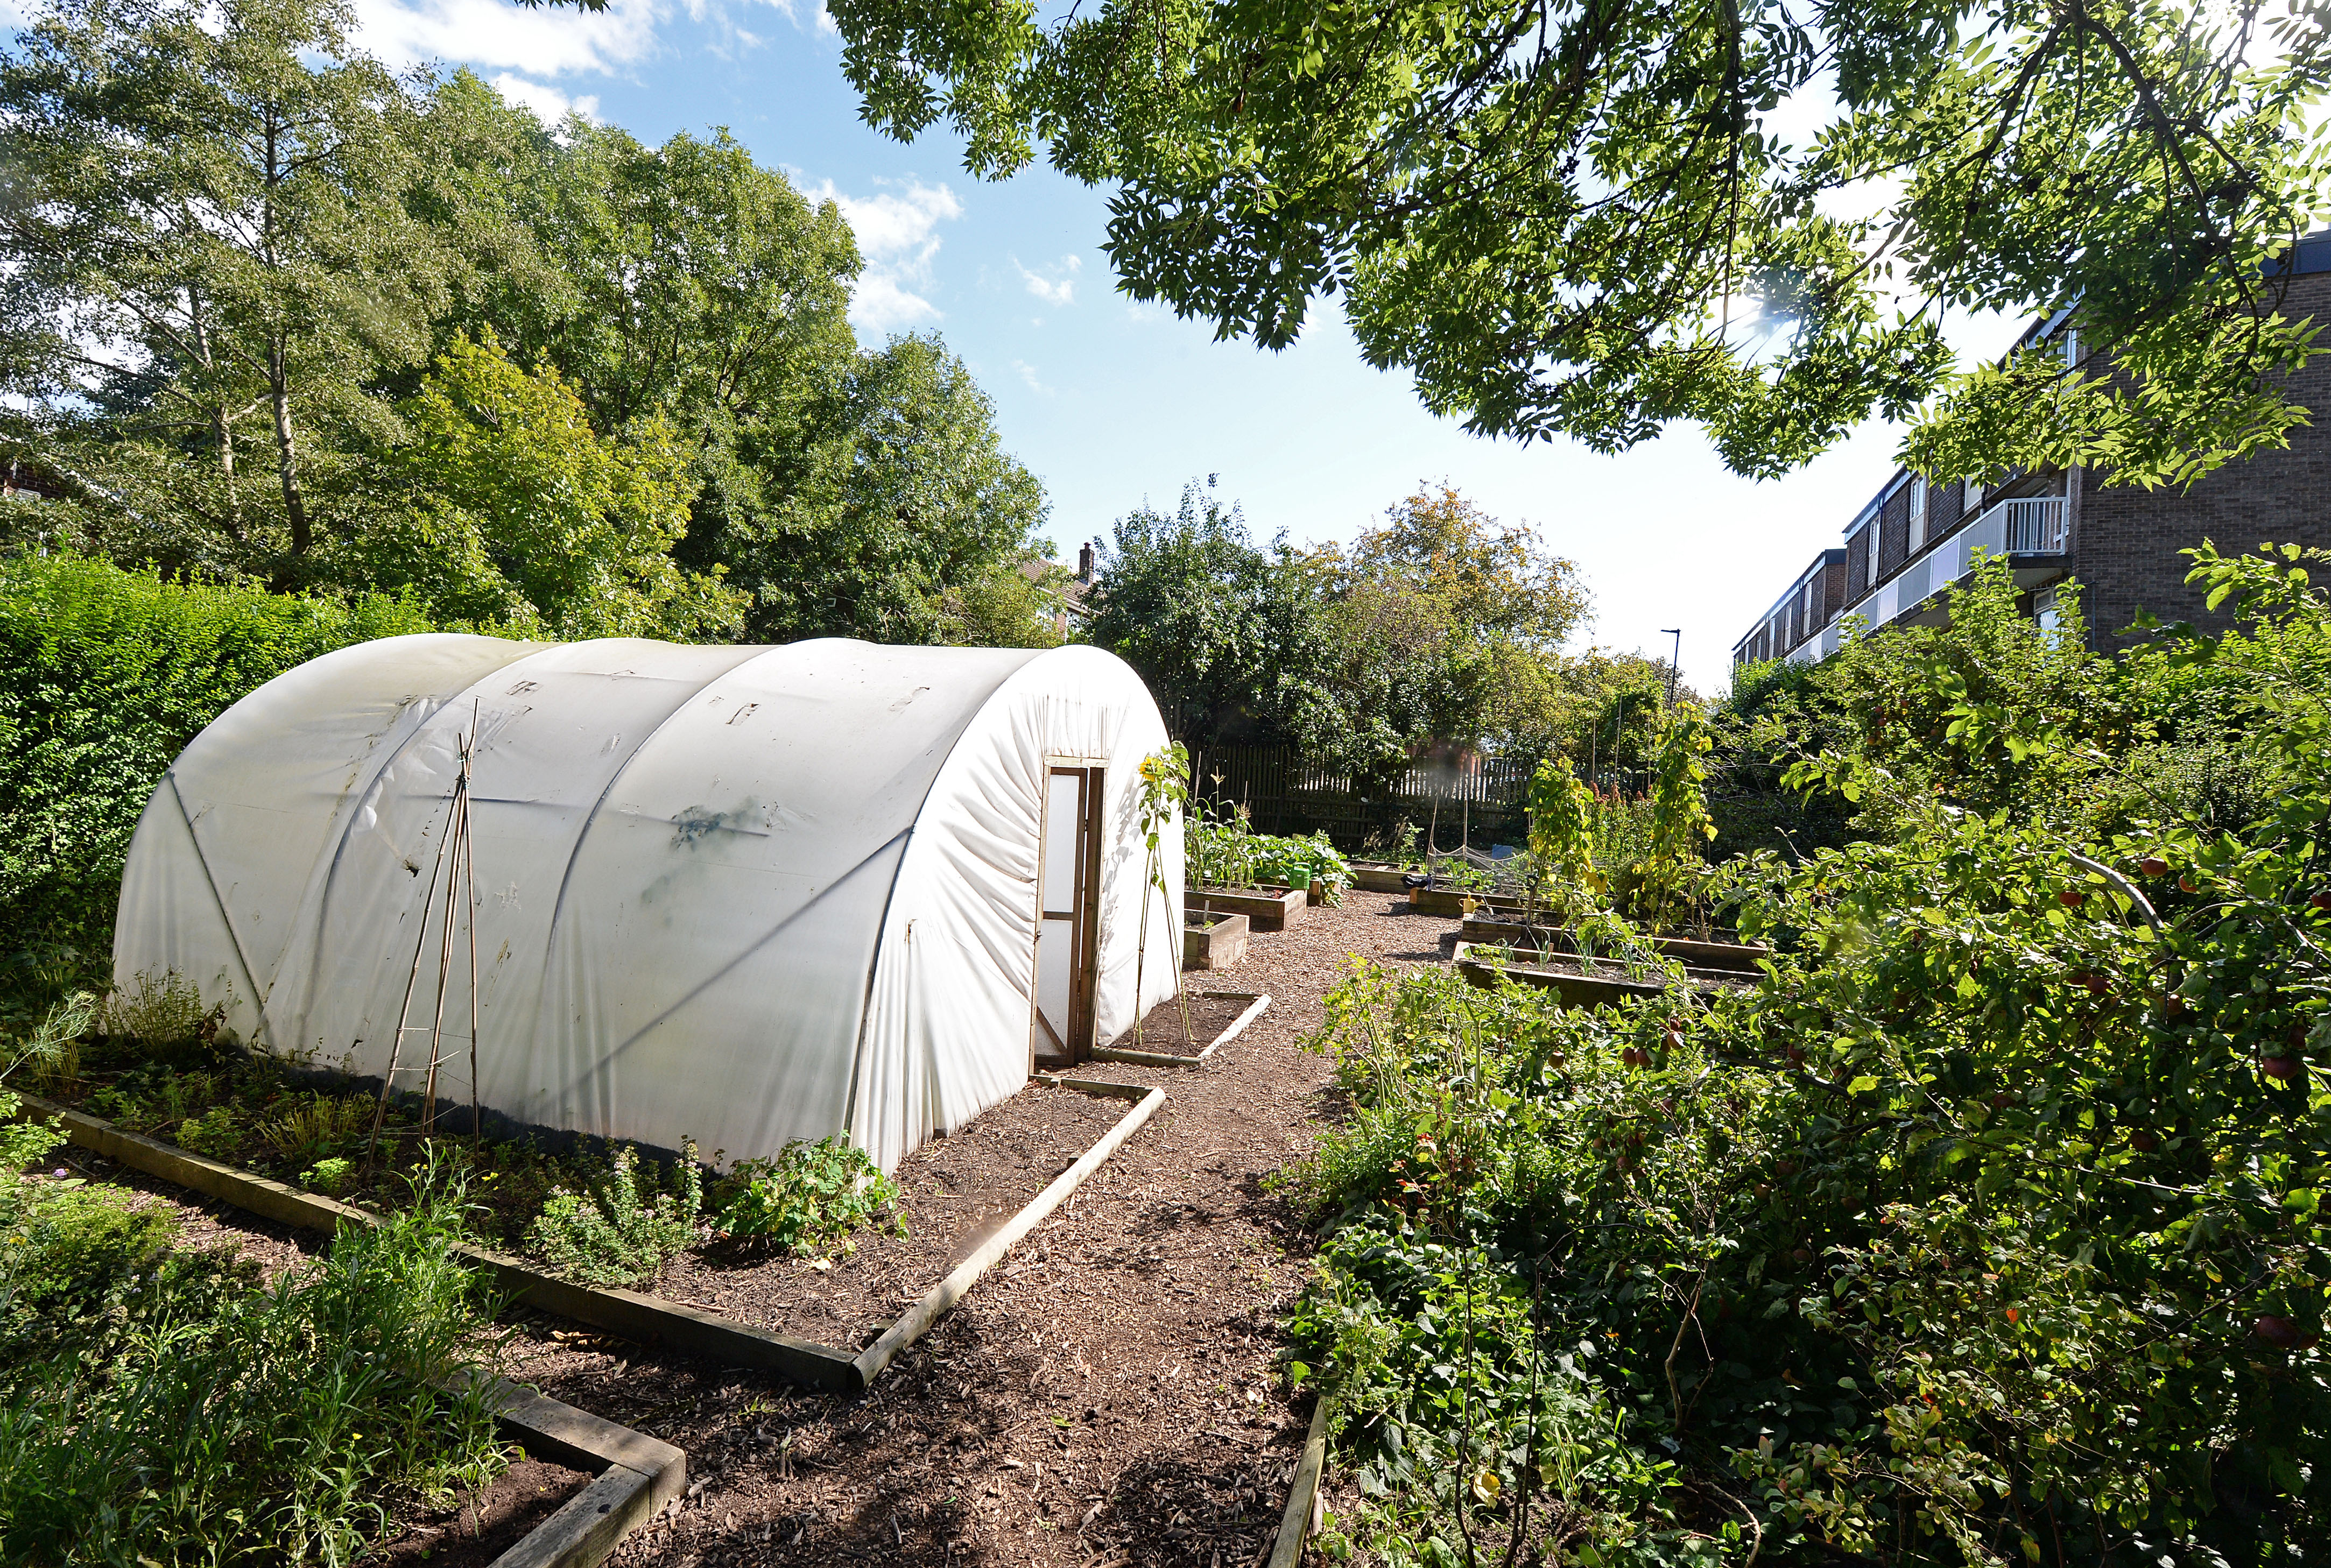 The Tinsley Community Allotment in Sheffield, South Yorkshire, which has won a 'Cultivation Street' award - a competition run by celebrity gardener, David Domoney.